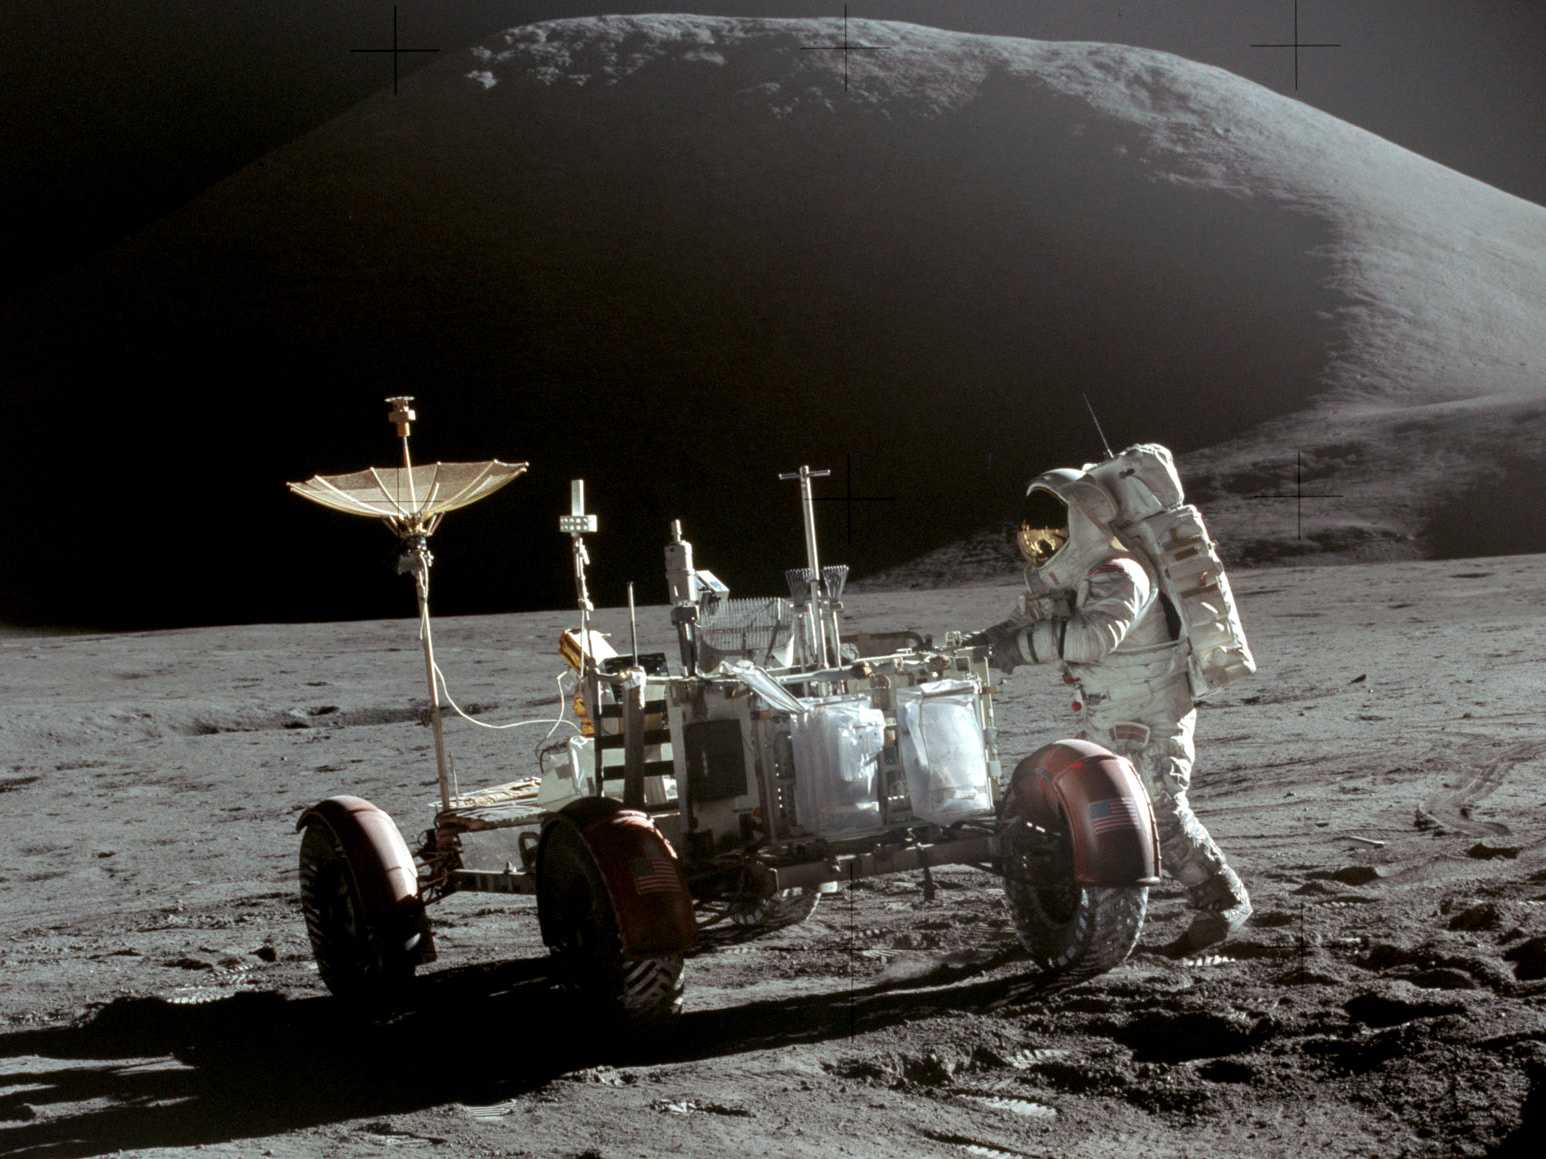 astronaut Jim Irwin stands next to the lunar rover on the moon, with a mountain in the background